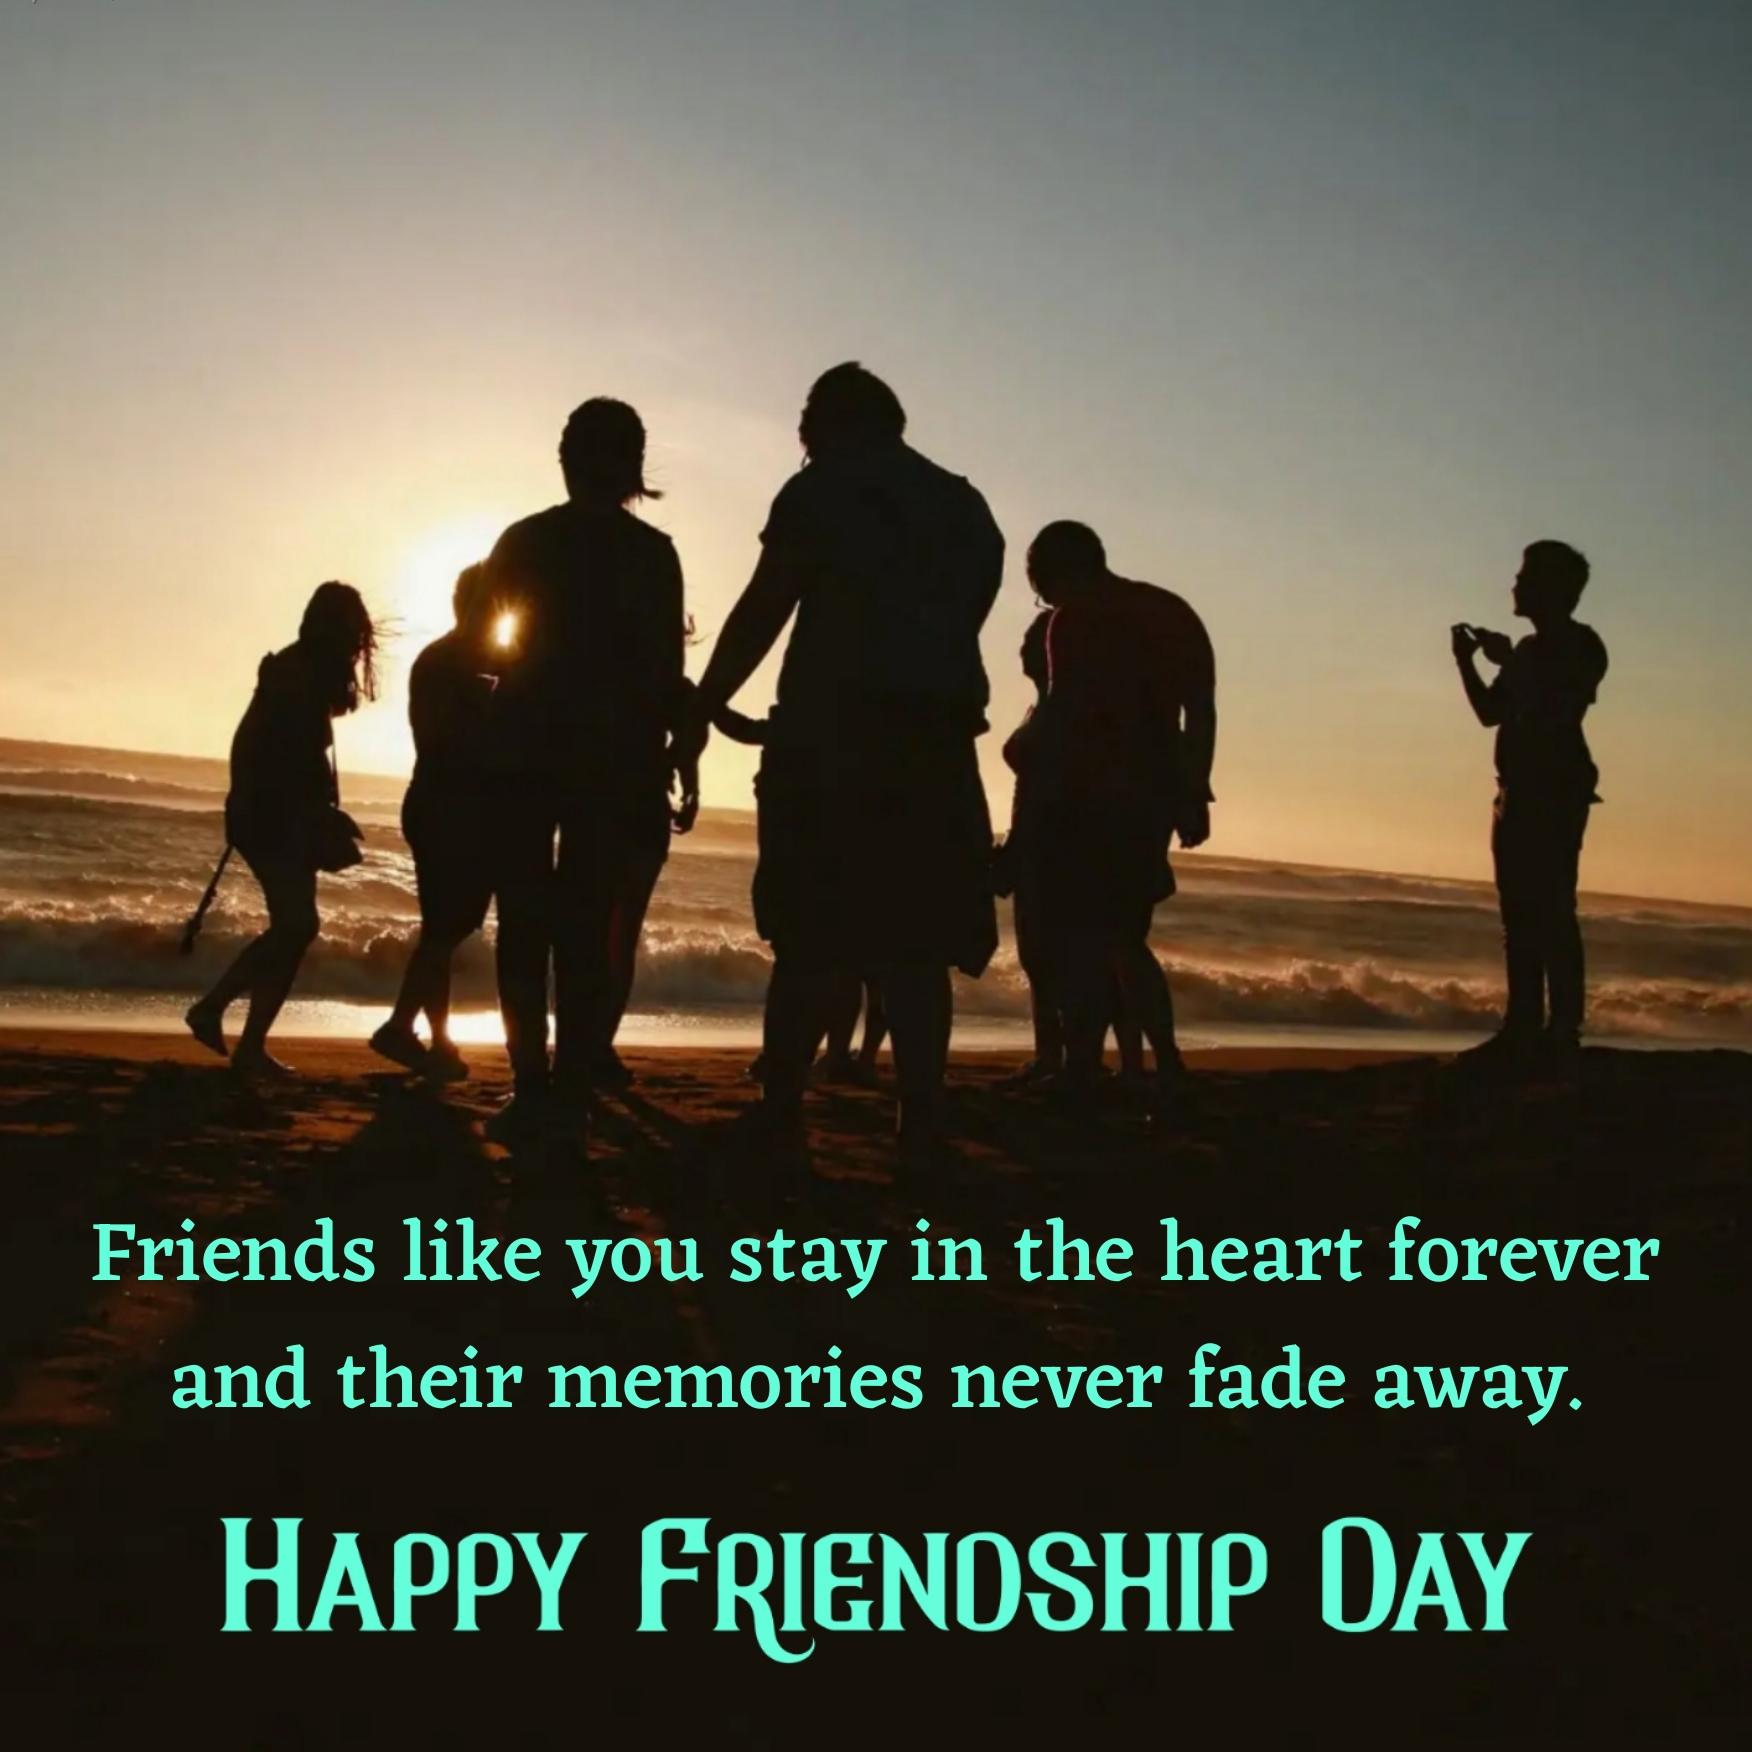 Friends like you stay in the heart forever and their memories